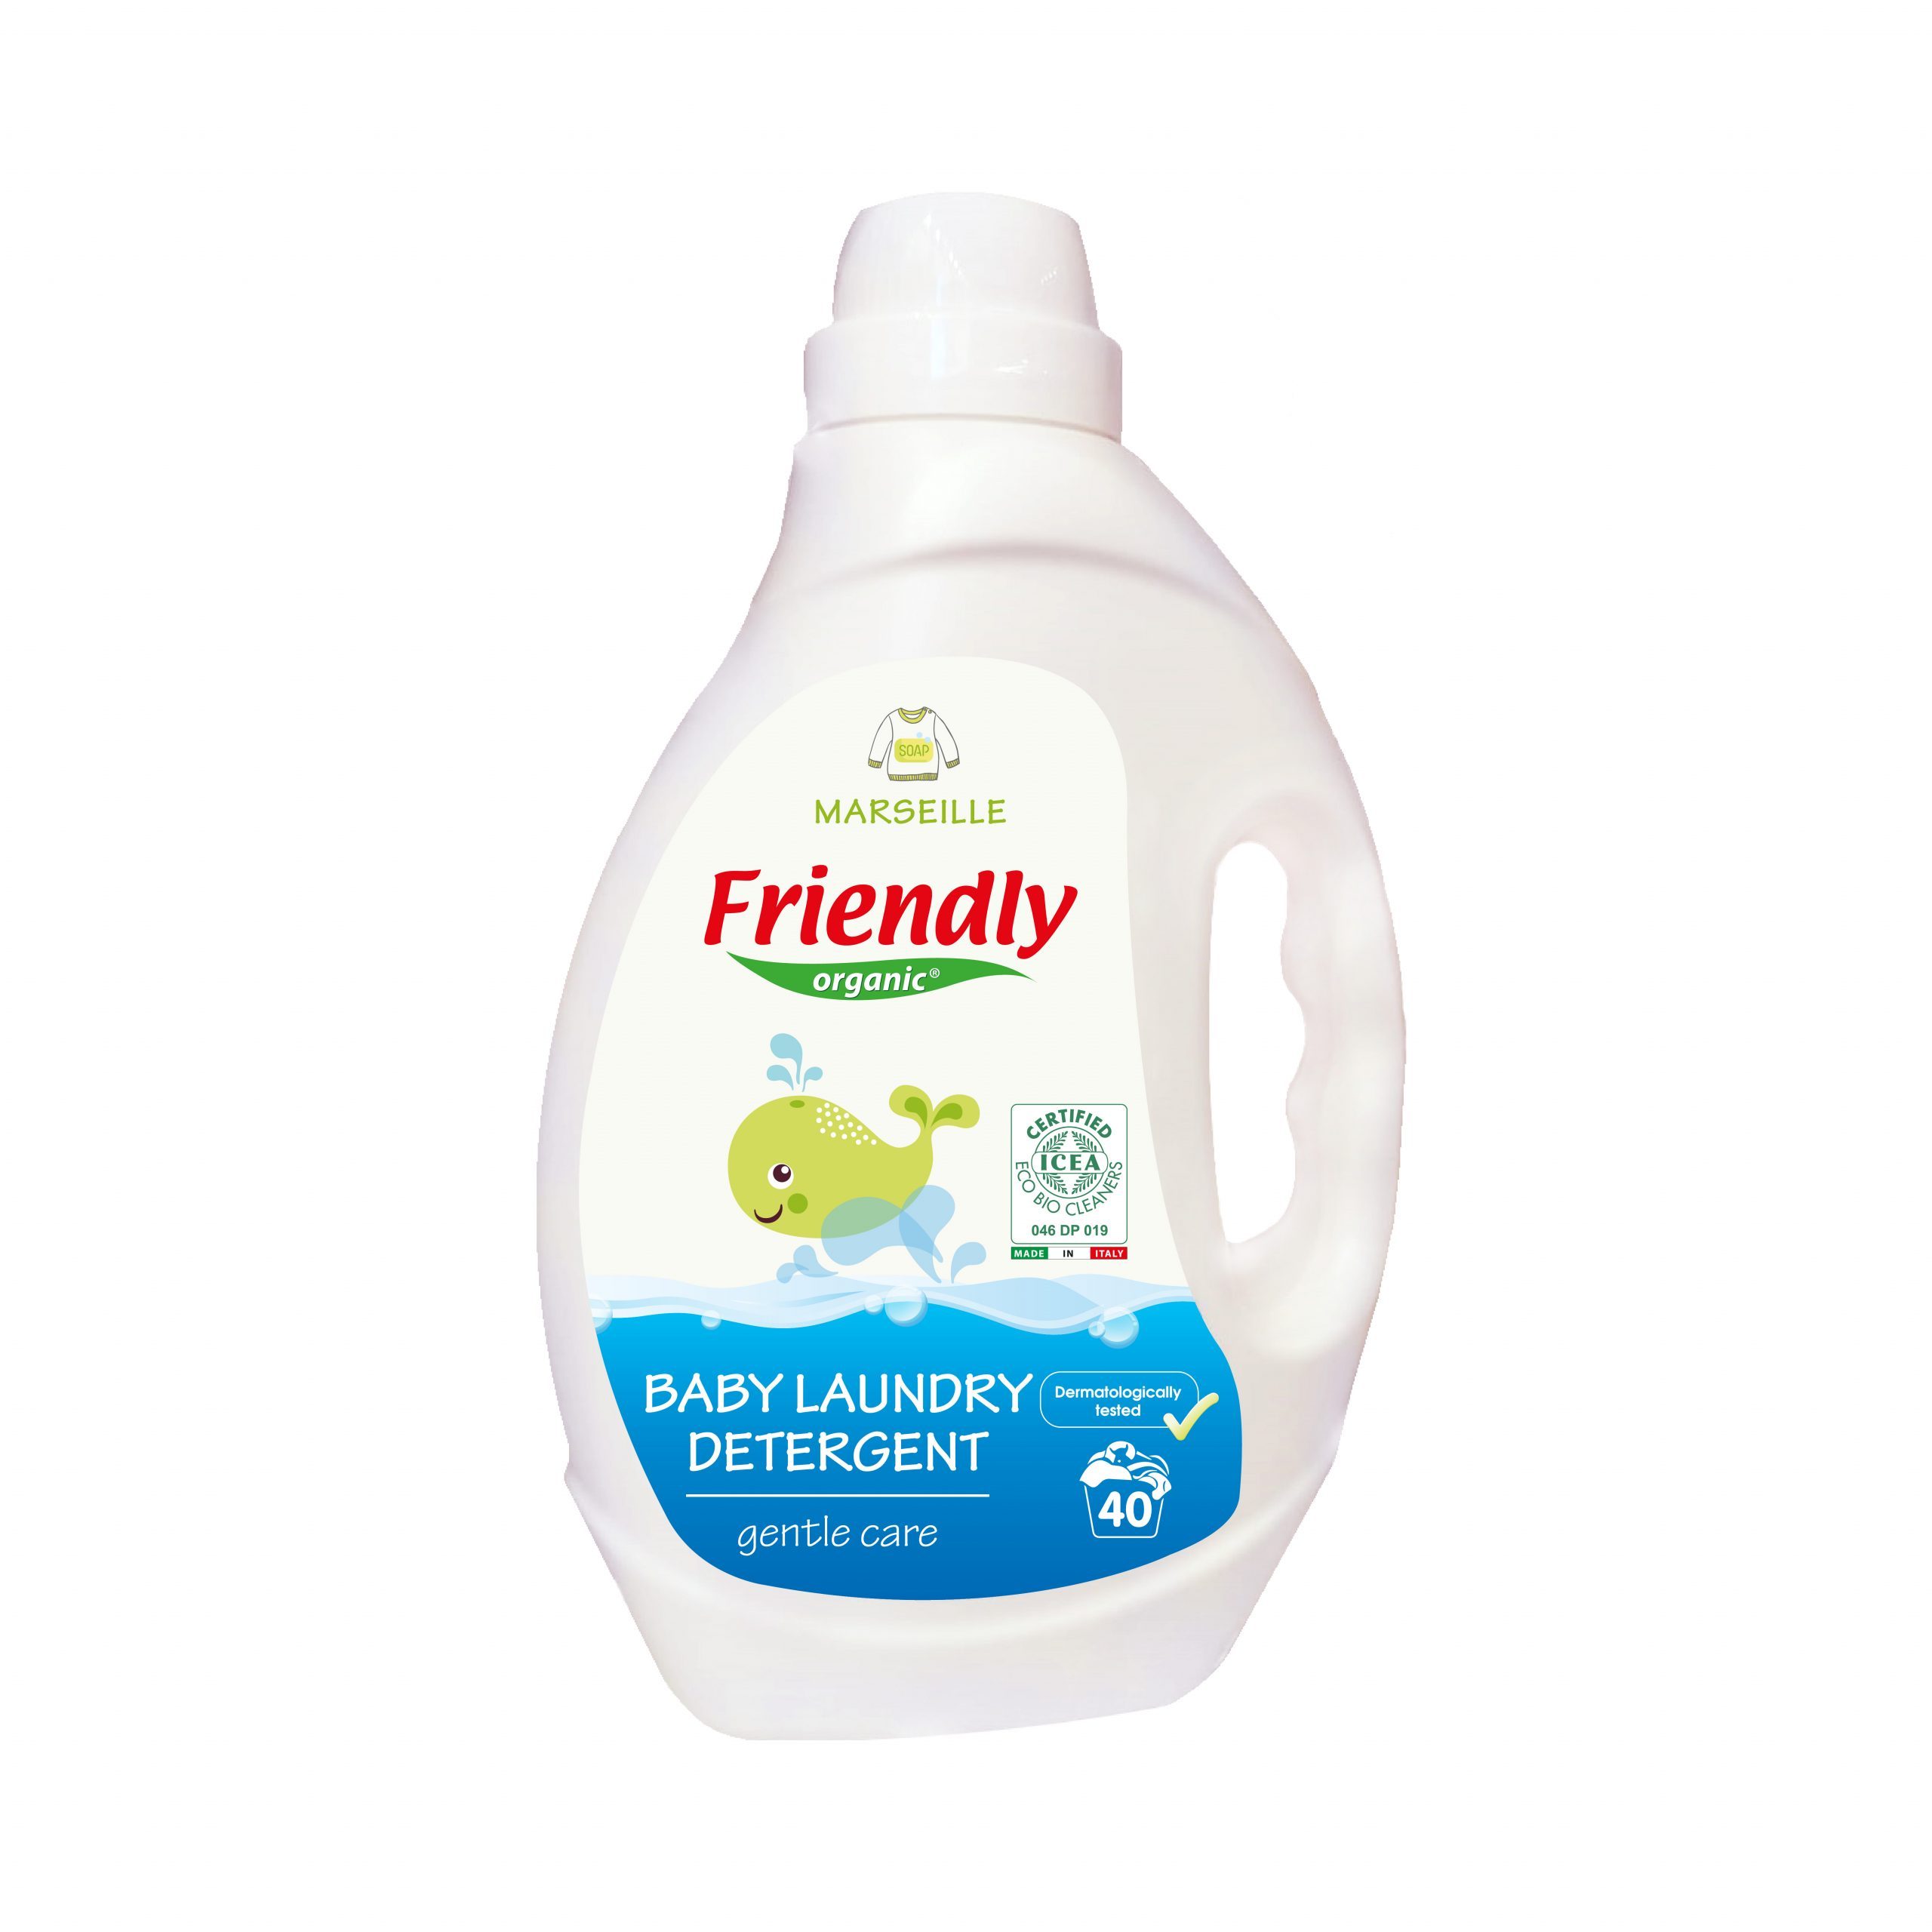 friendly-organic-baby-laundry-detergent-marseille-2000-ml-scaled-1